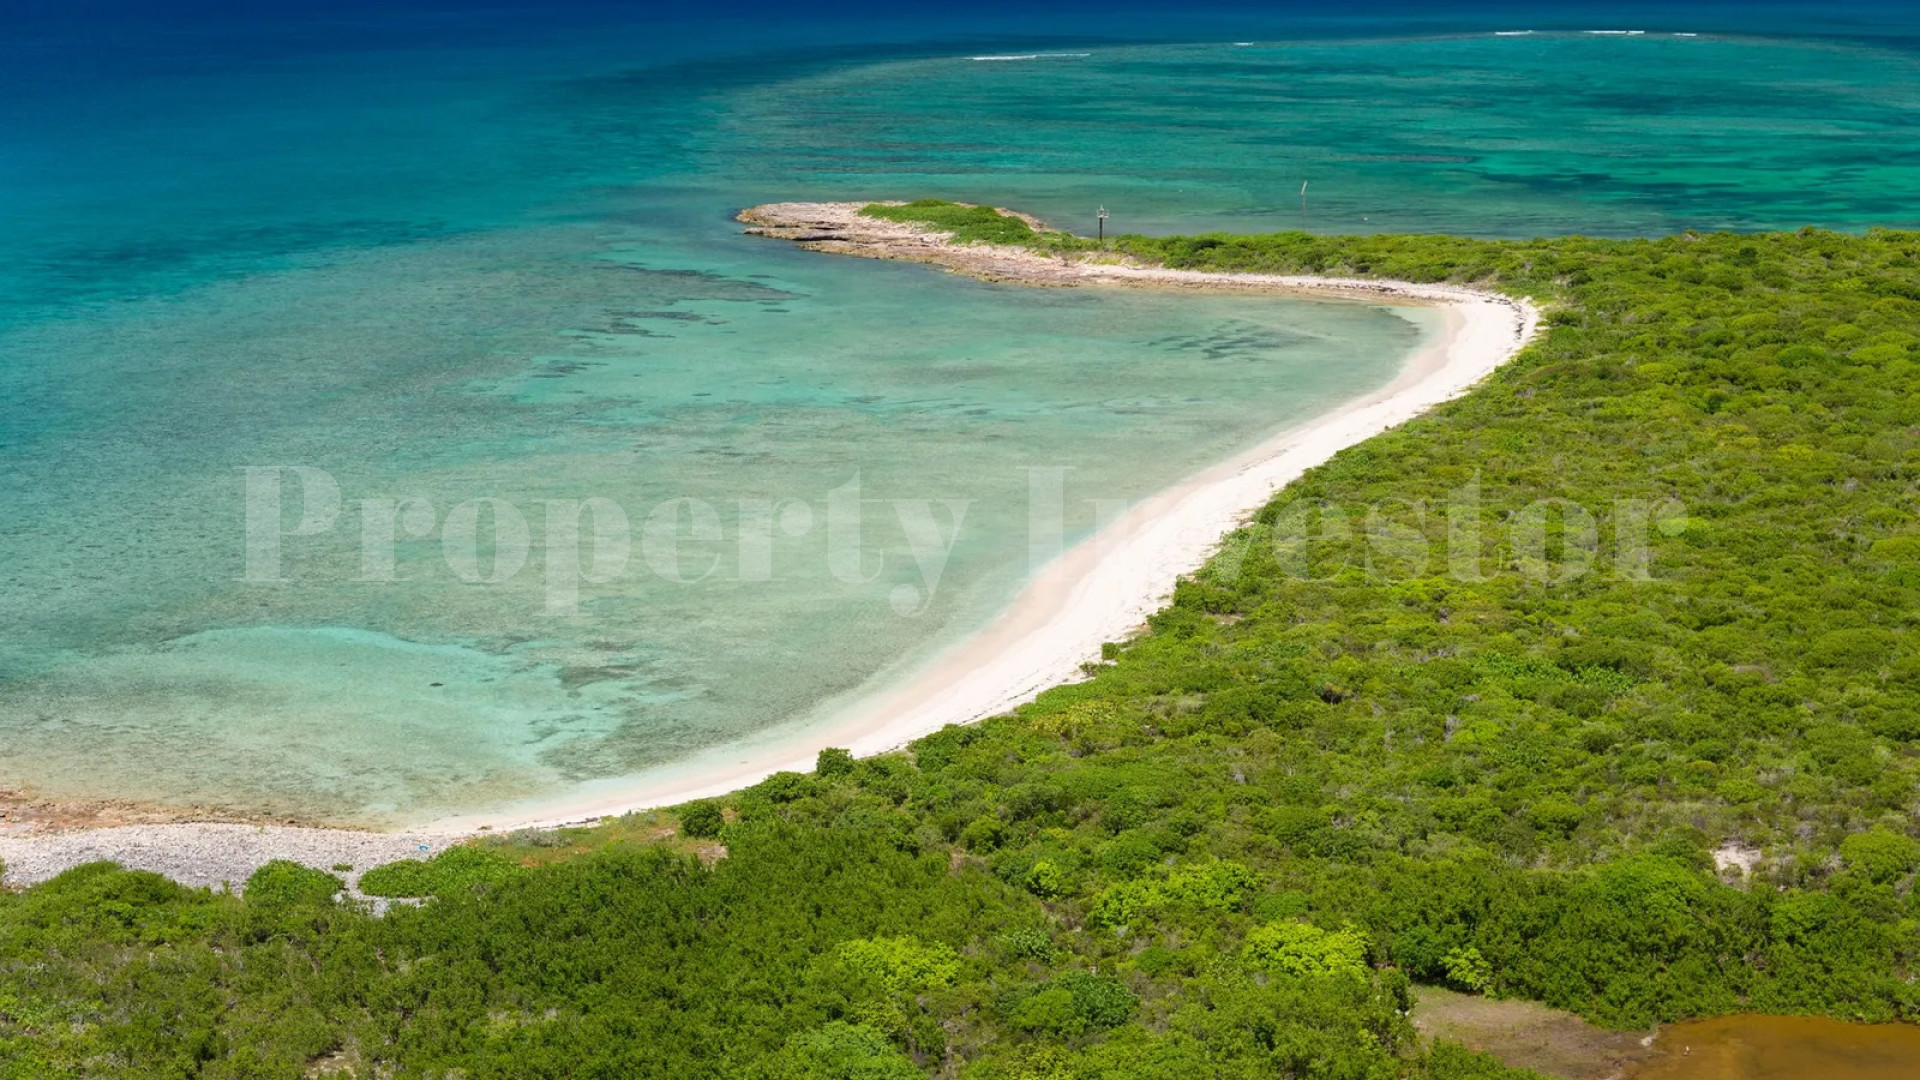 Secluded 5.64 Hectare Lot for Commercial Development in Northwest Point for Sale in Providenciales, Turks & Caicos